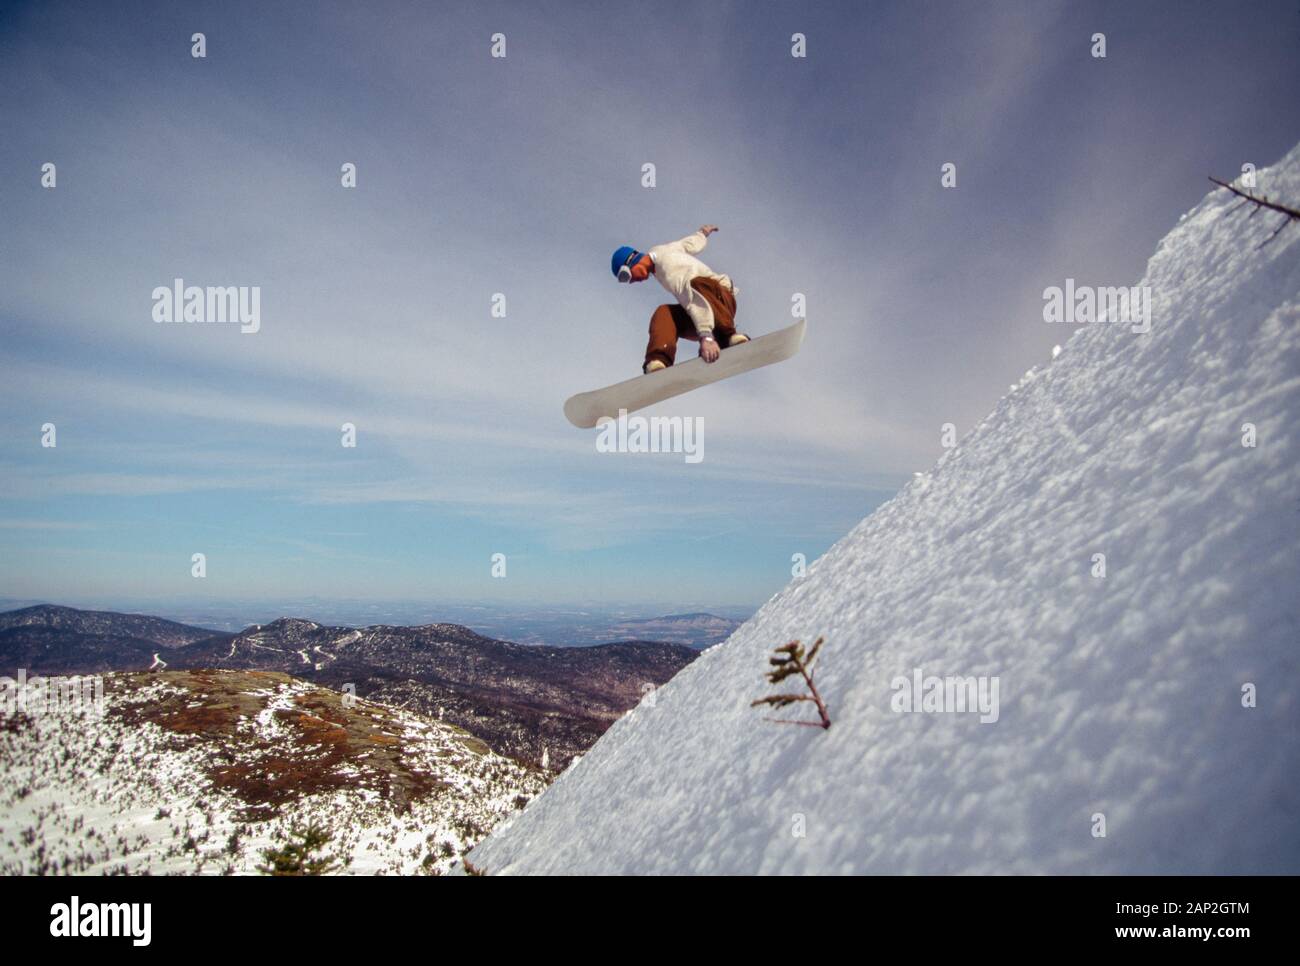 Snowboarder jumping off a large cliff in the backcountry in Stowe Vermont USA Stock Photo